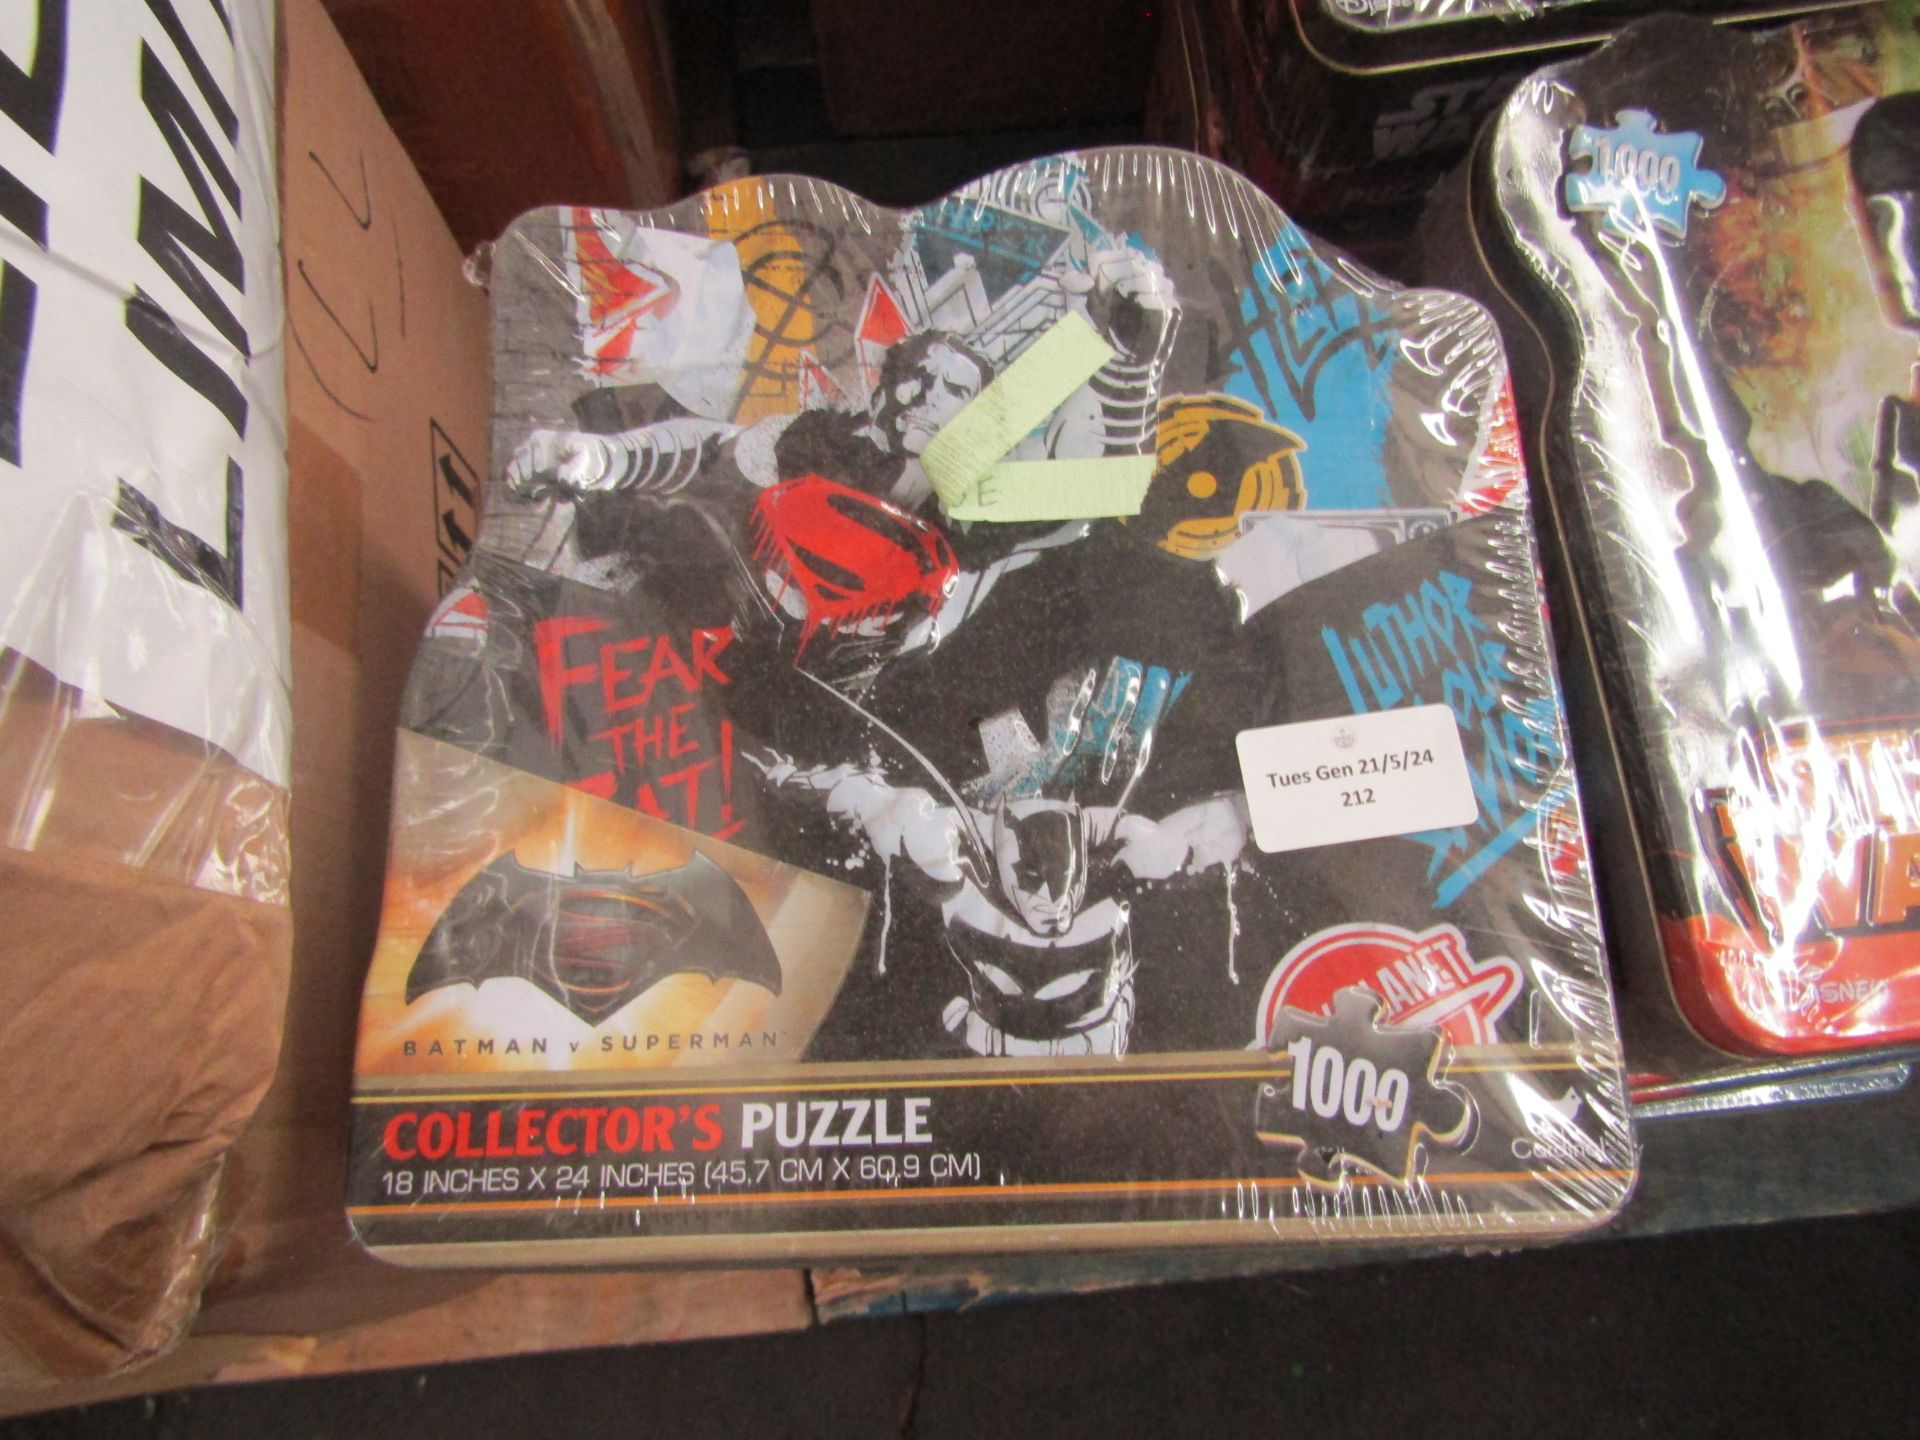 2x Staw Wars Collectors Puzzles, Unchecked & Packaged. 2x Batman vs Superman Collectors Puzzles,